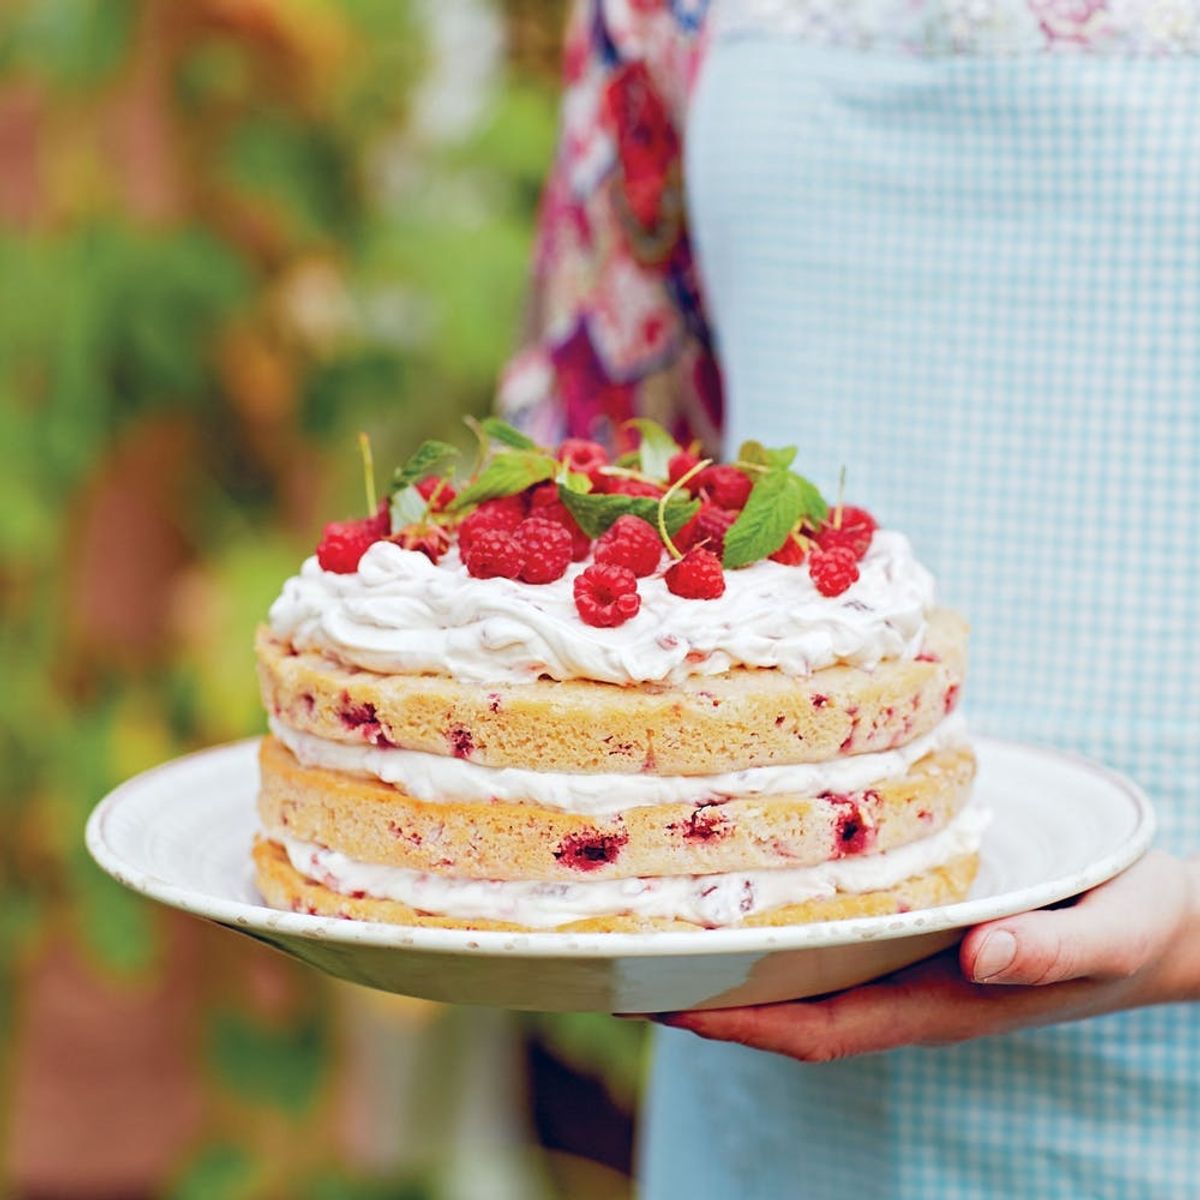 This Natural, “Naked” Raspberry Cake Is the Perfect End for Outdoor Summer Meals